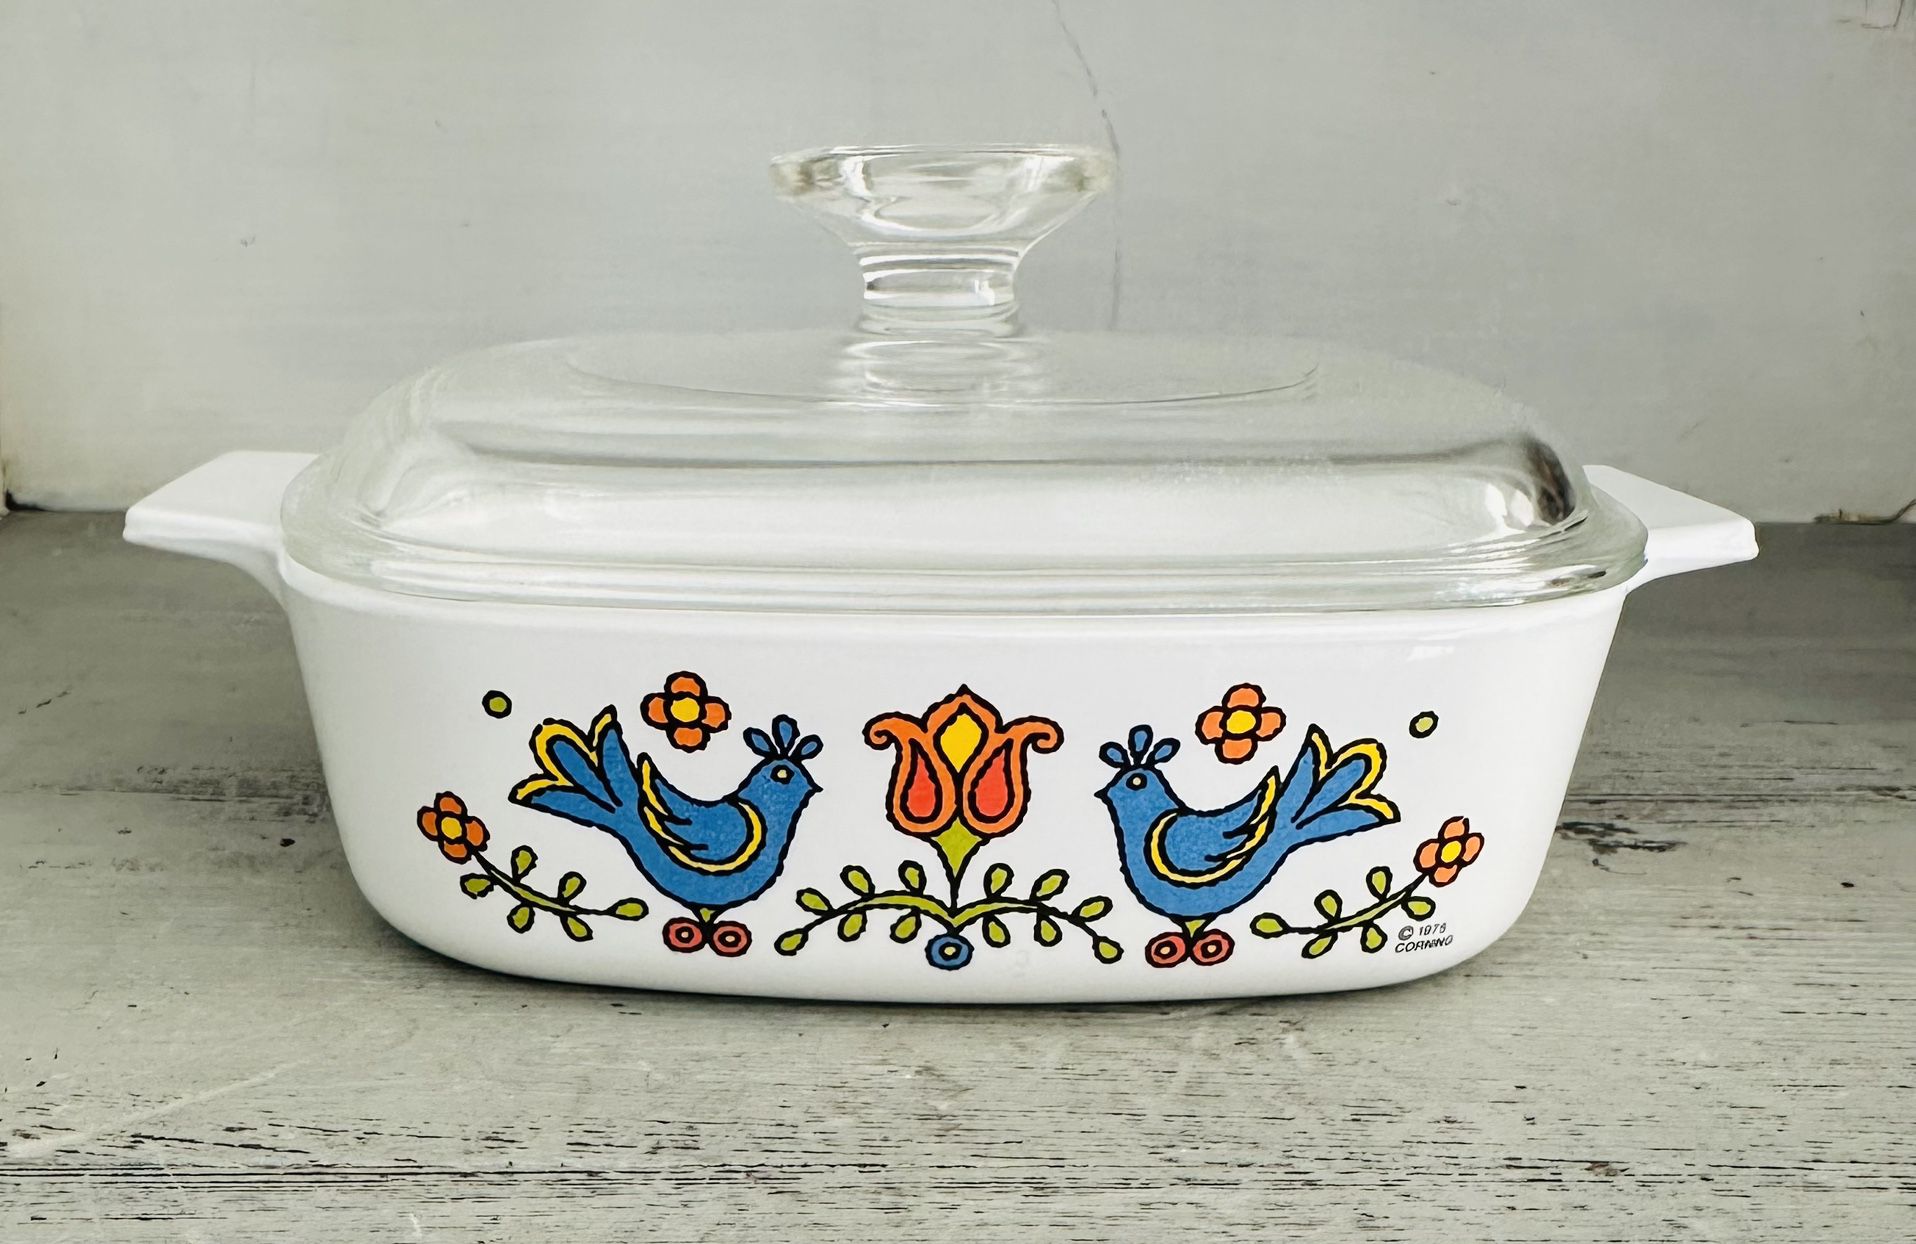 Vintage 1975 Corning ware Country Festival pattern 1 quart casserole dish with lid  